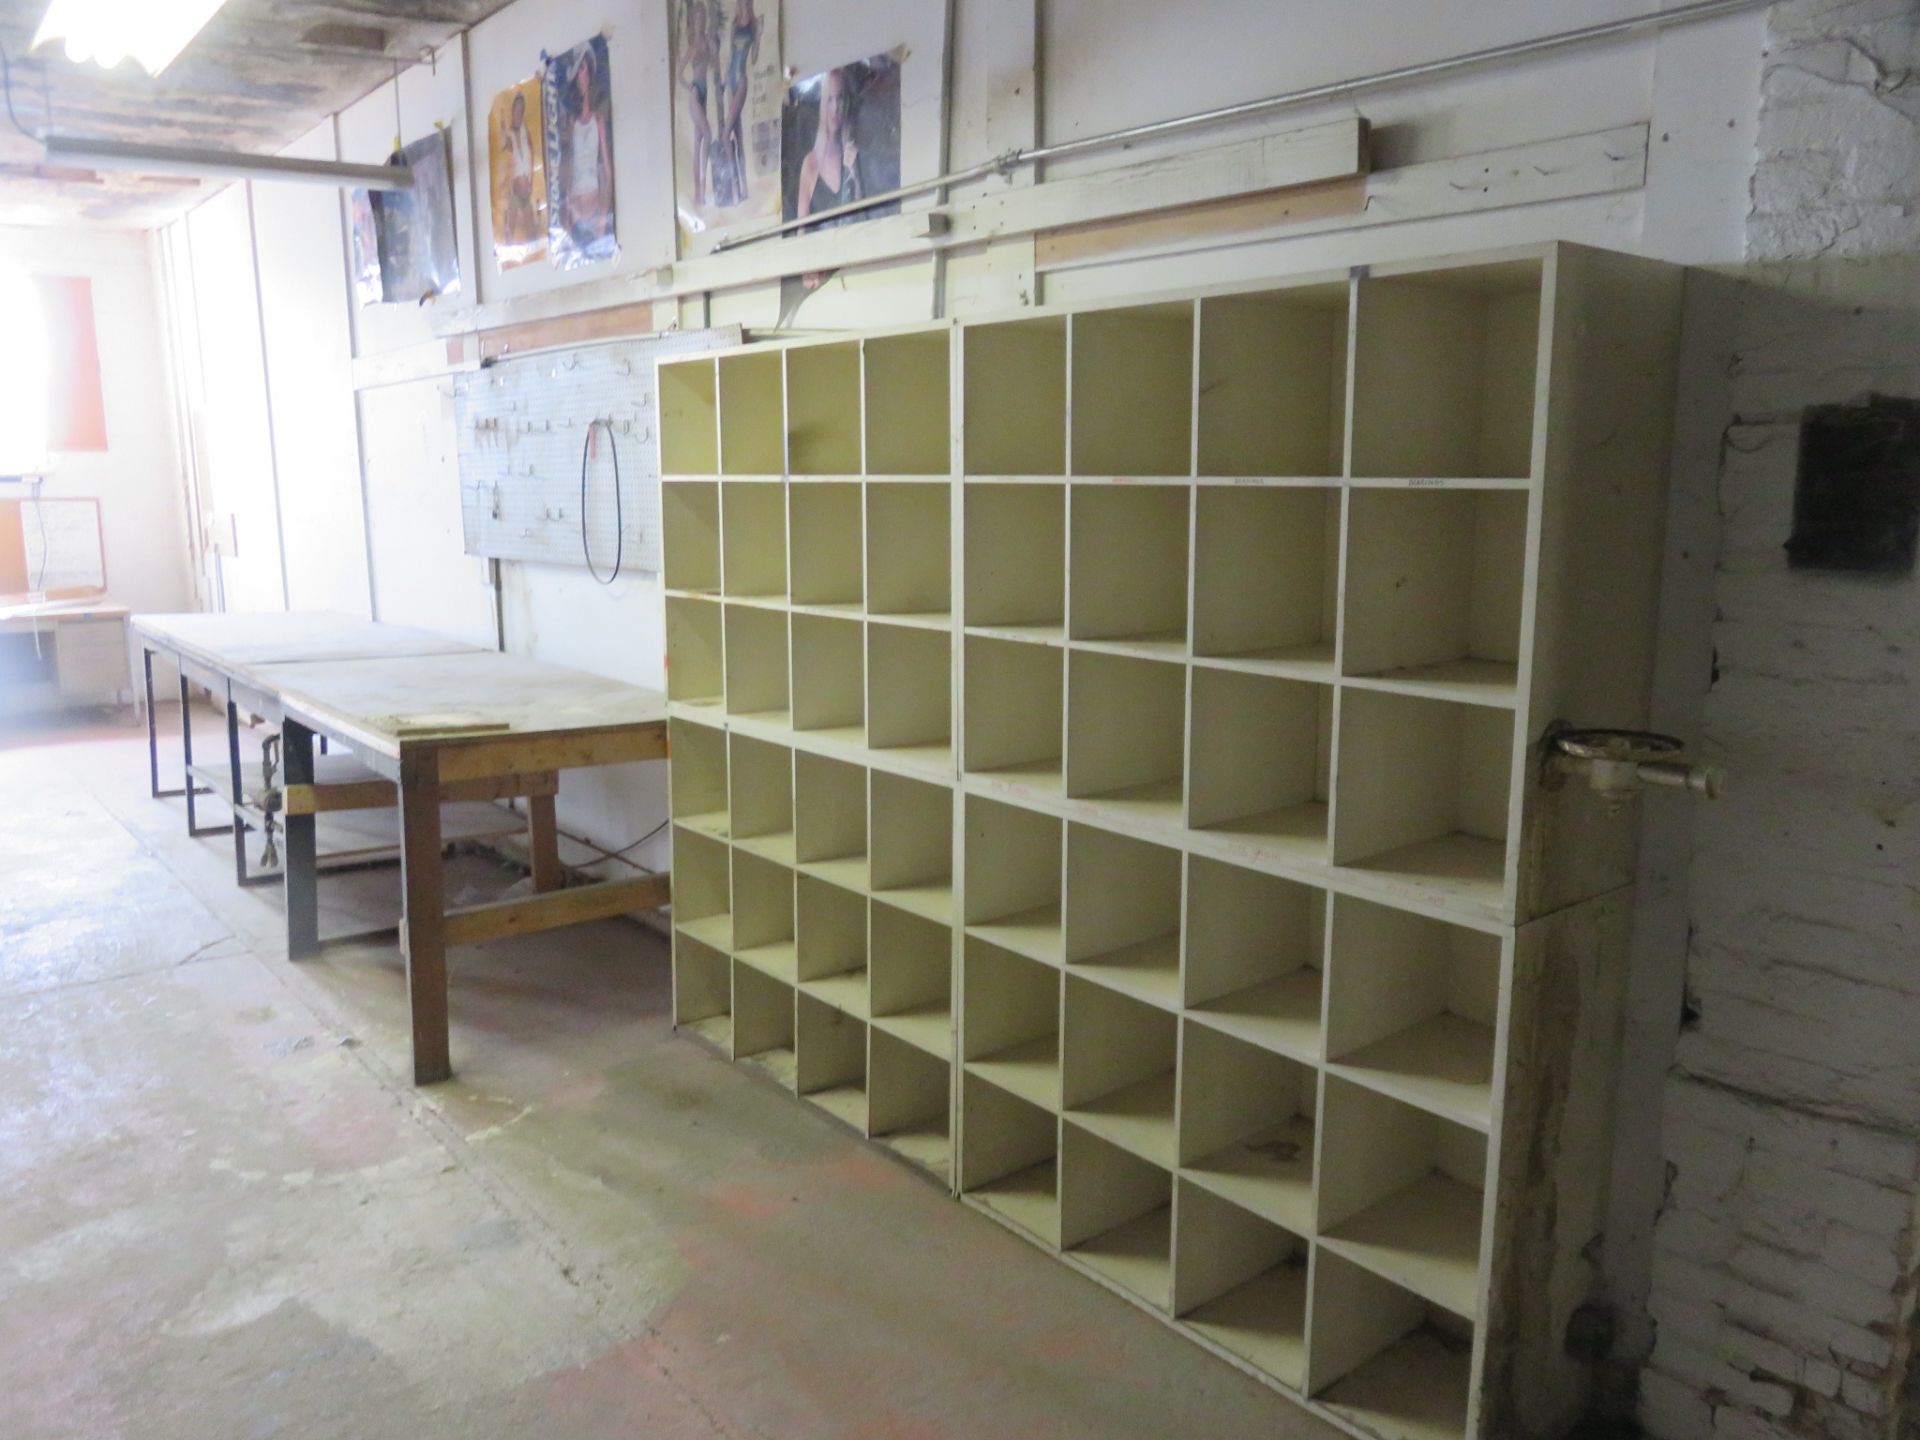 Lot of Cubed Storage Shelving approx 96"x 14" x 72" & Custom Work Table approx 172"x 36"x 35" - Image 2 of 3